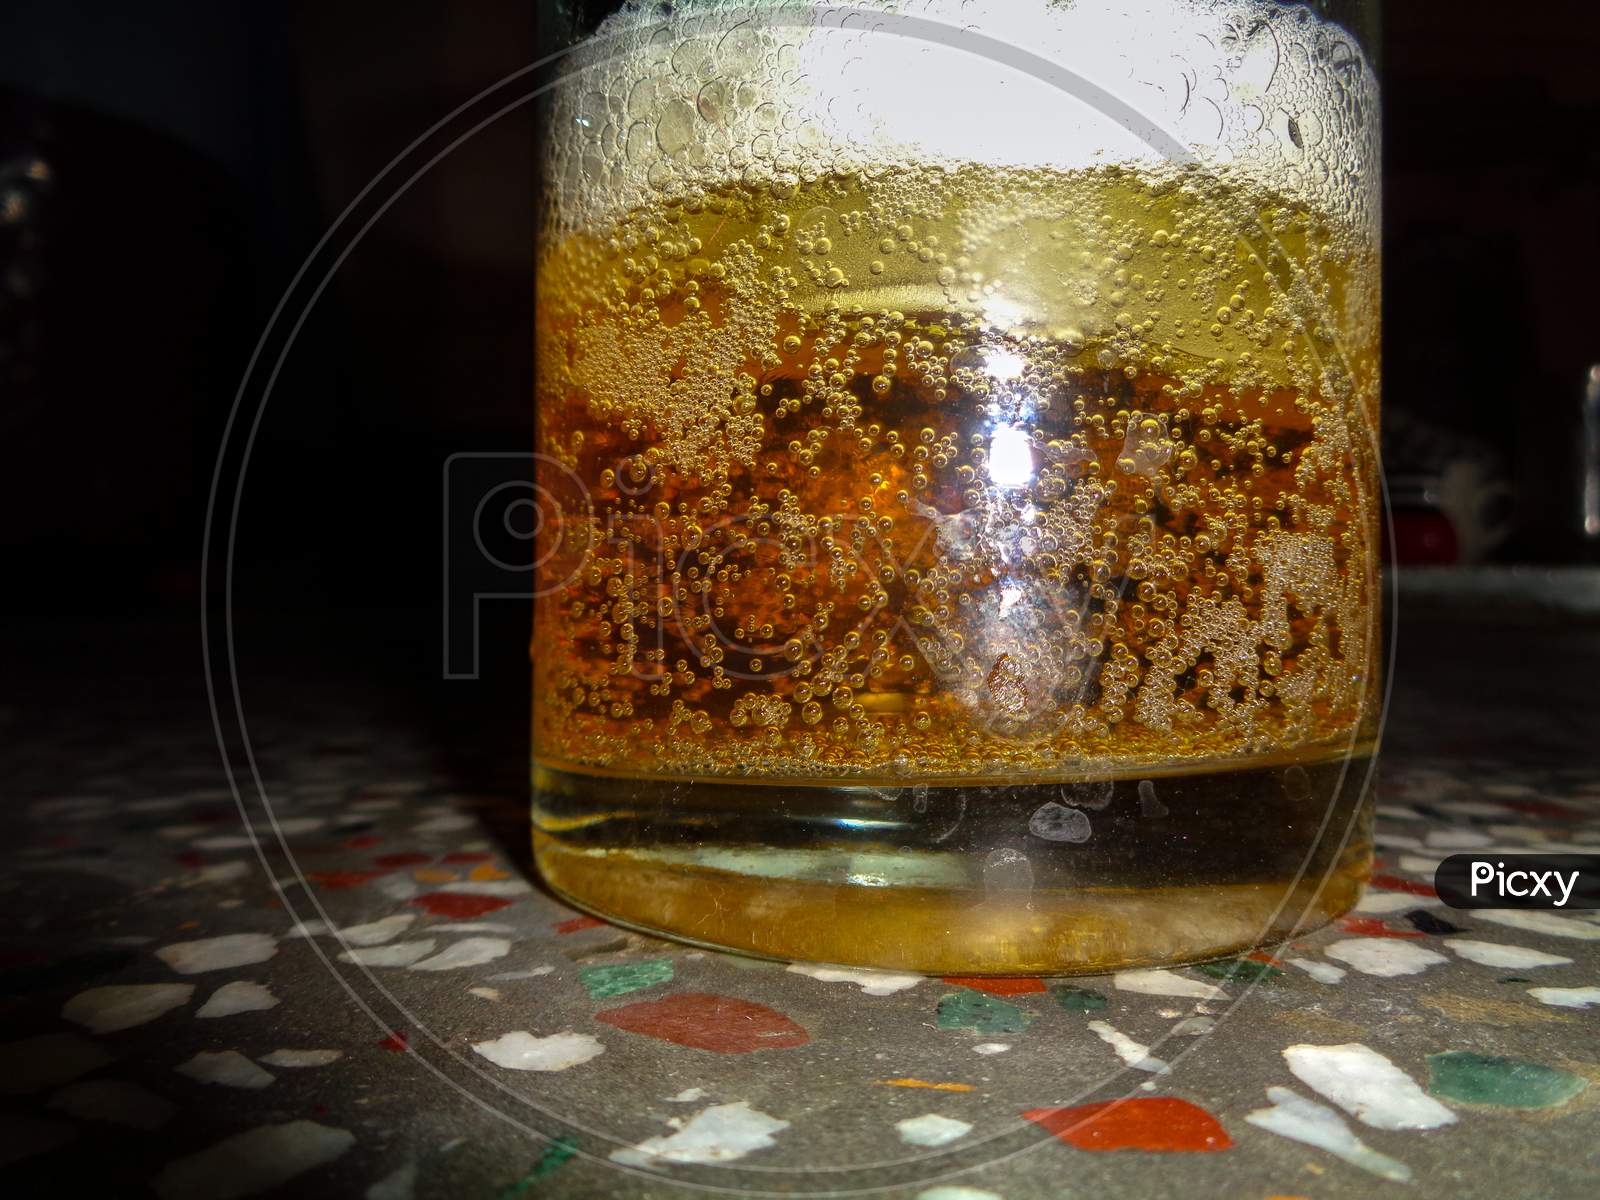 Close-up view of the beer liquid bubble in the beer mug